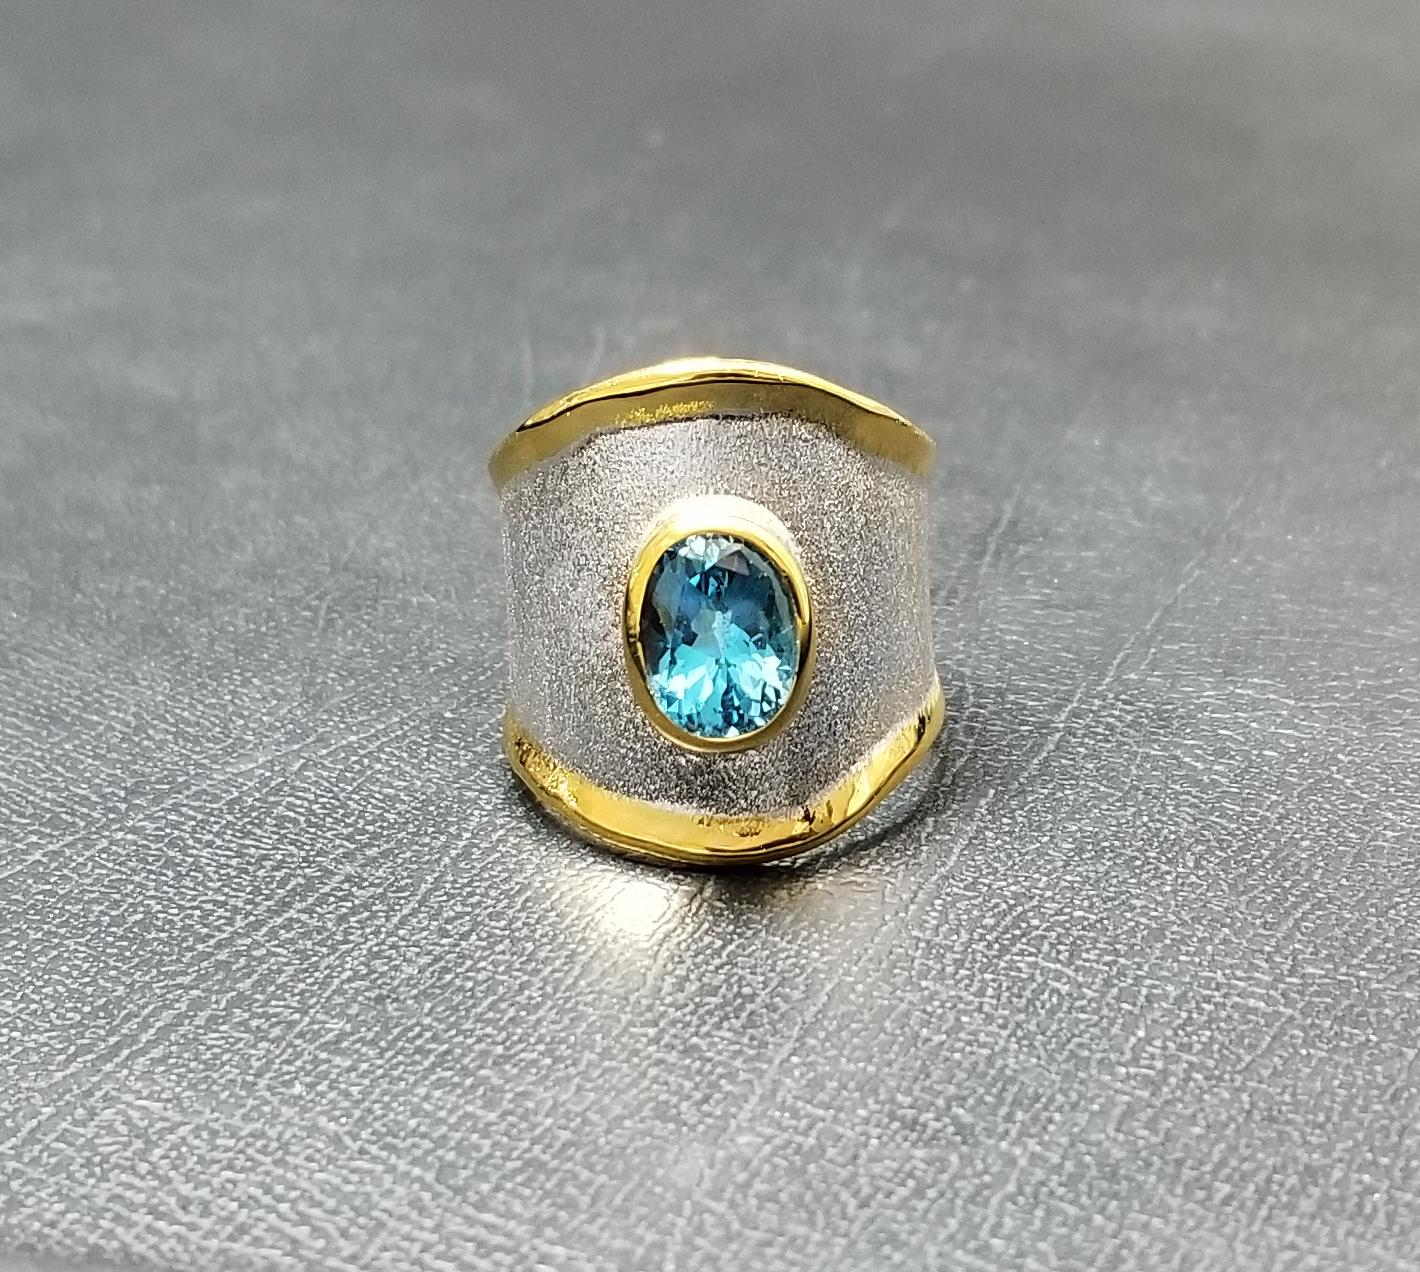 Oval Cut Yianni Creations 1.60 Carat Blue Topaz Ring in Fine Silver and 24 Karat Gold